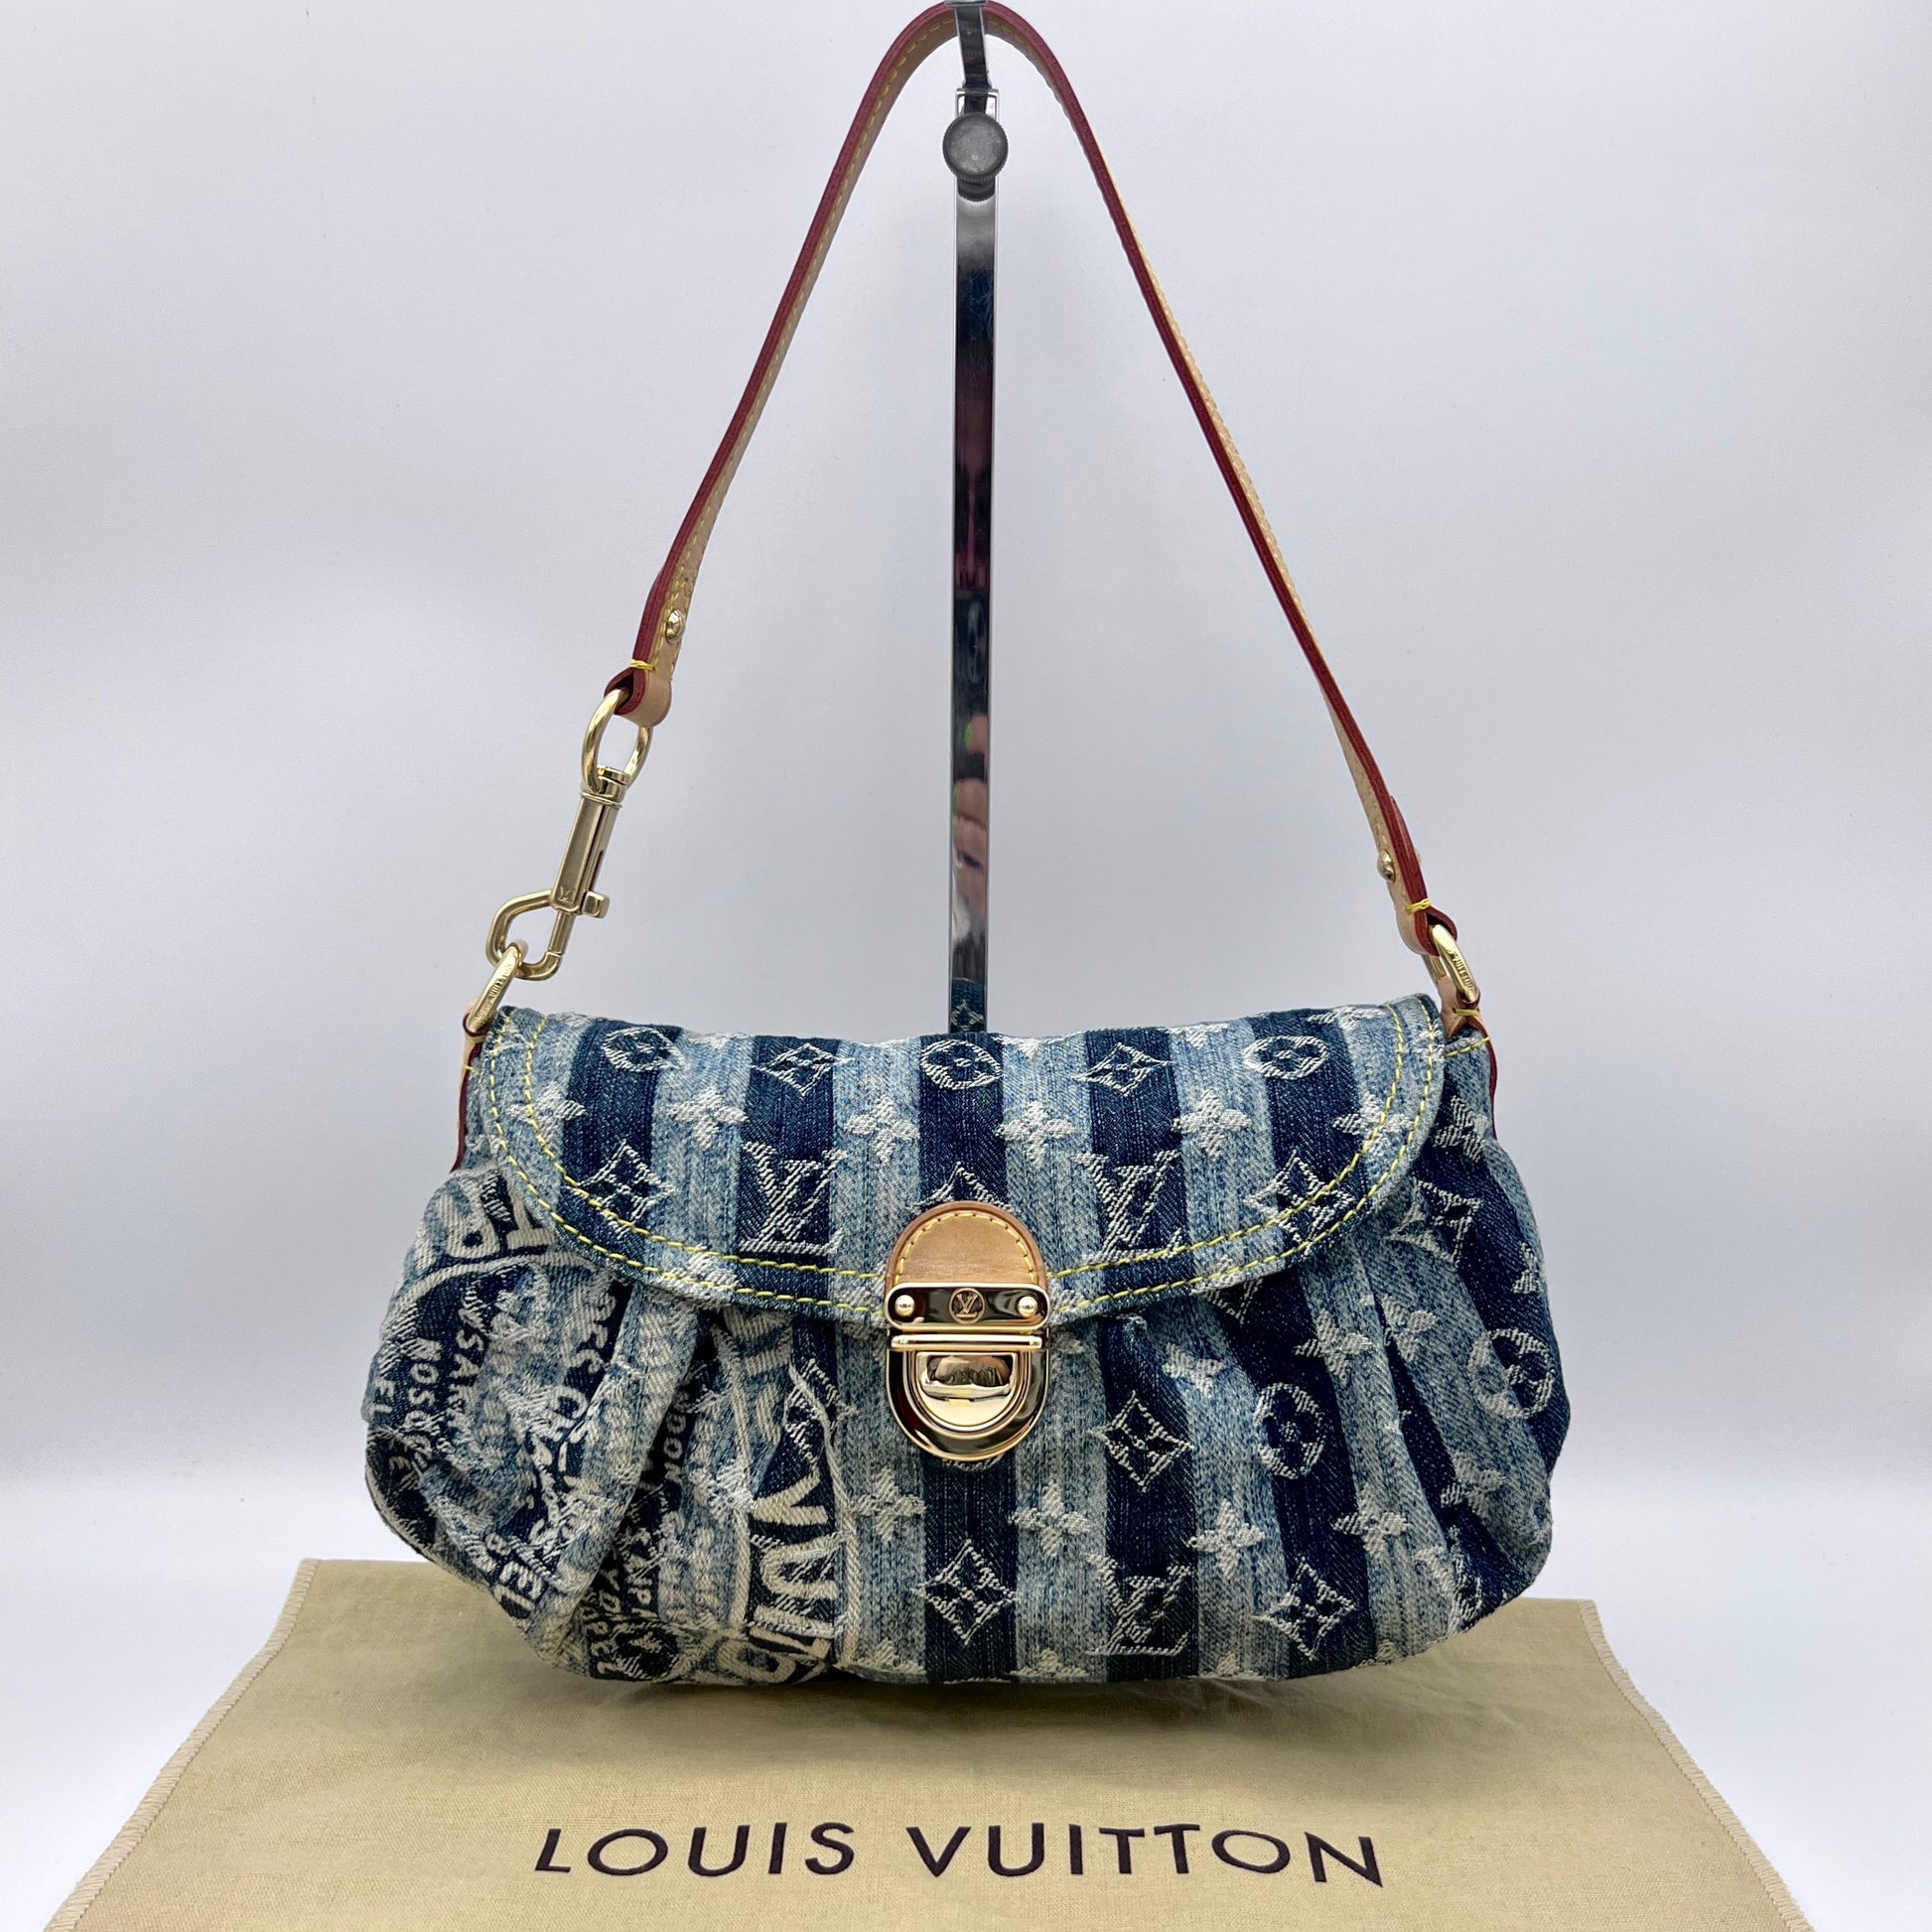 Pre-Owned Rare limited edition Louis Vuitton LOUIS VUITTON leather